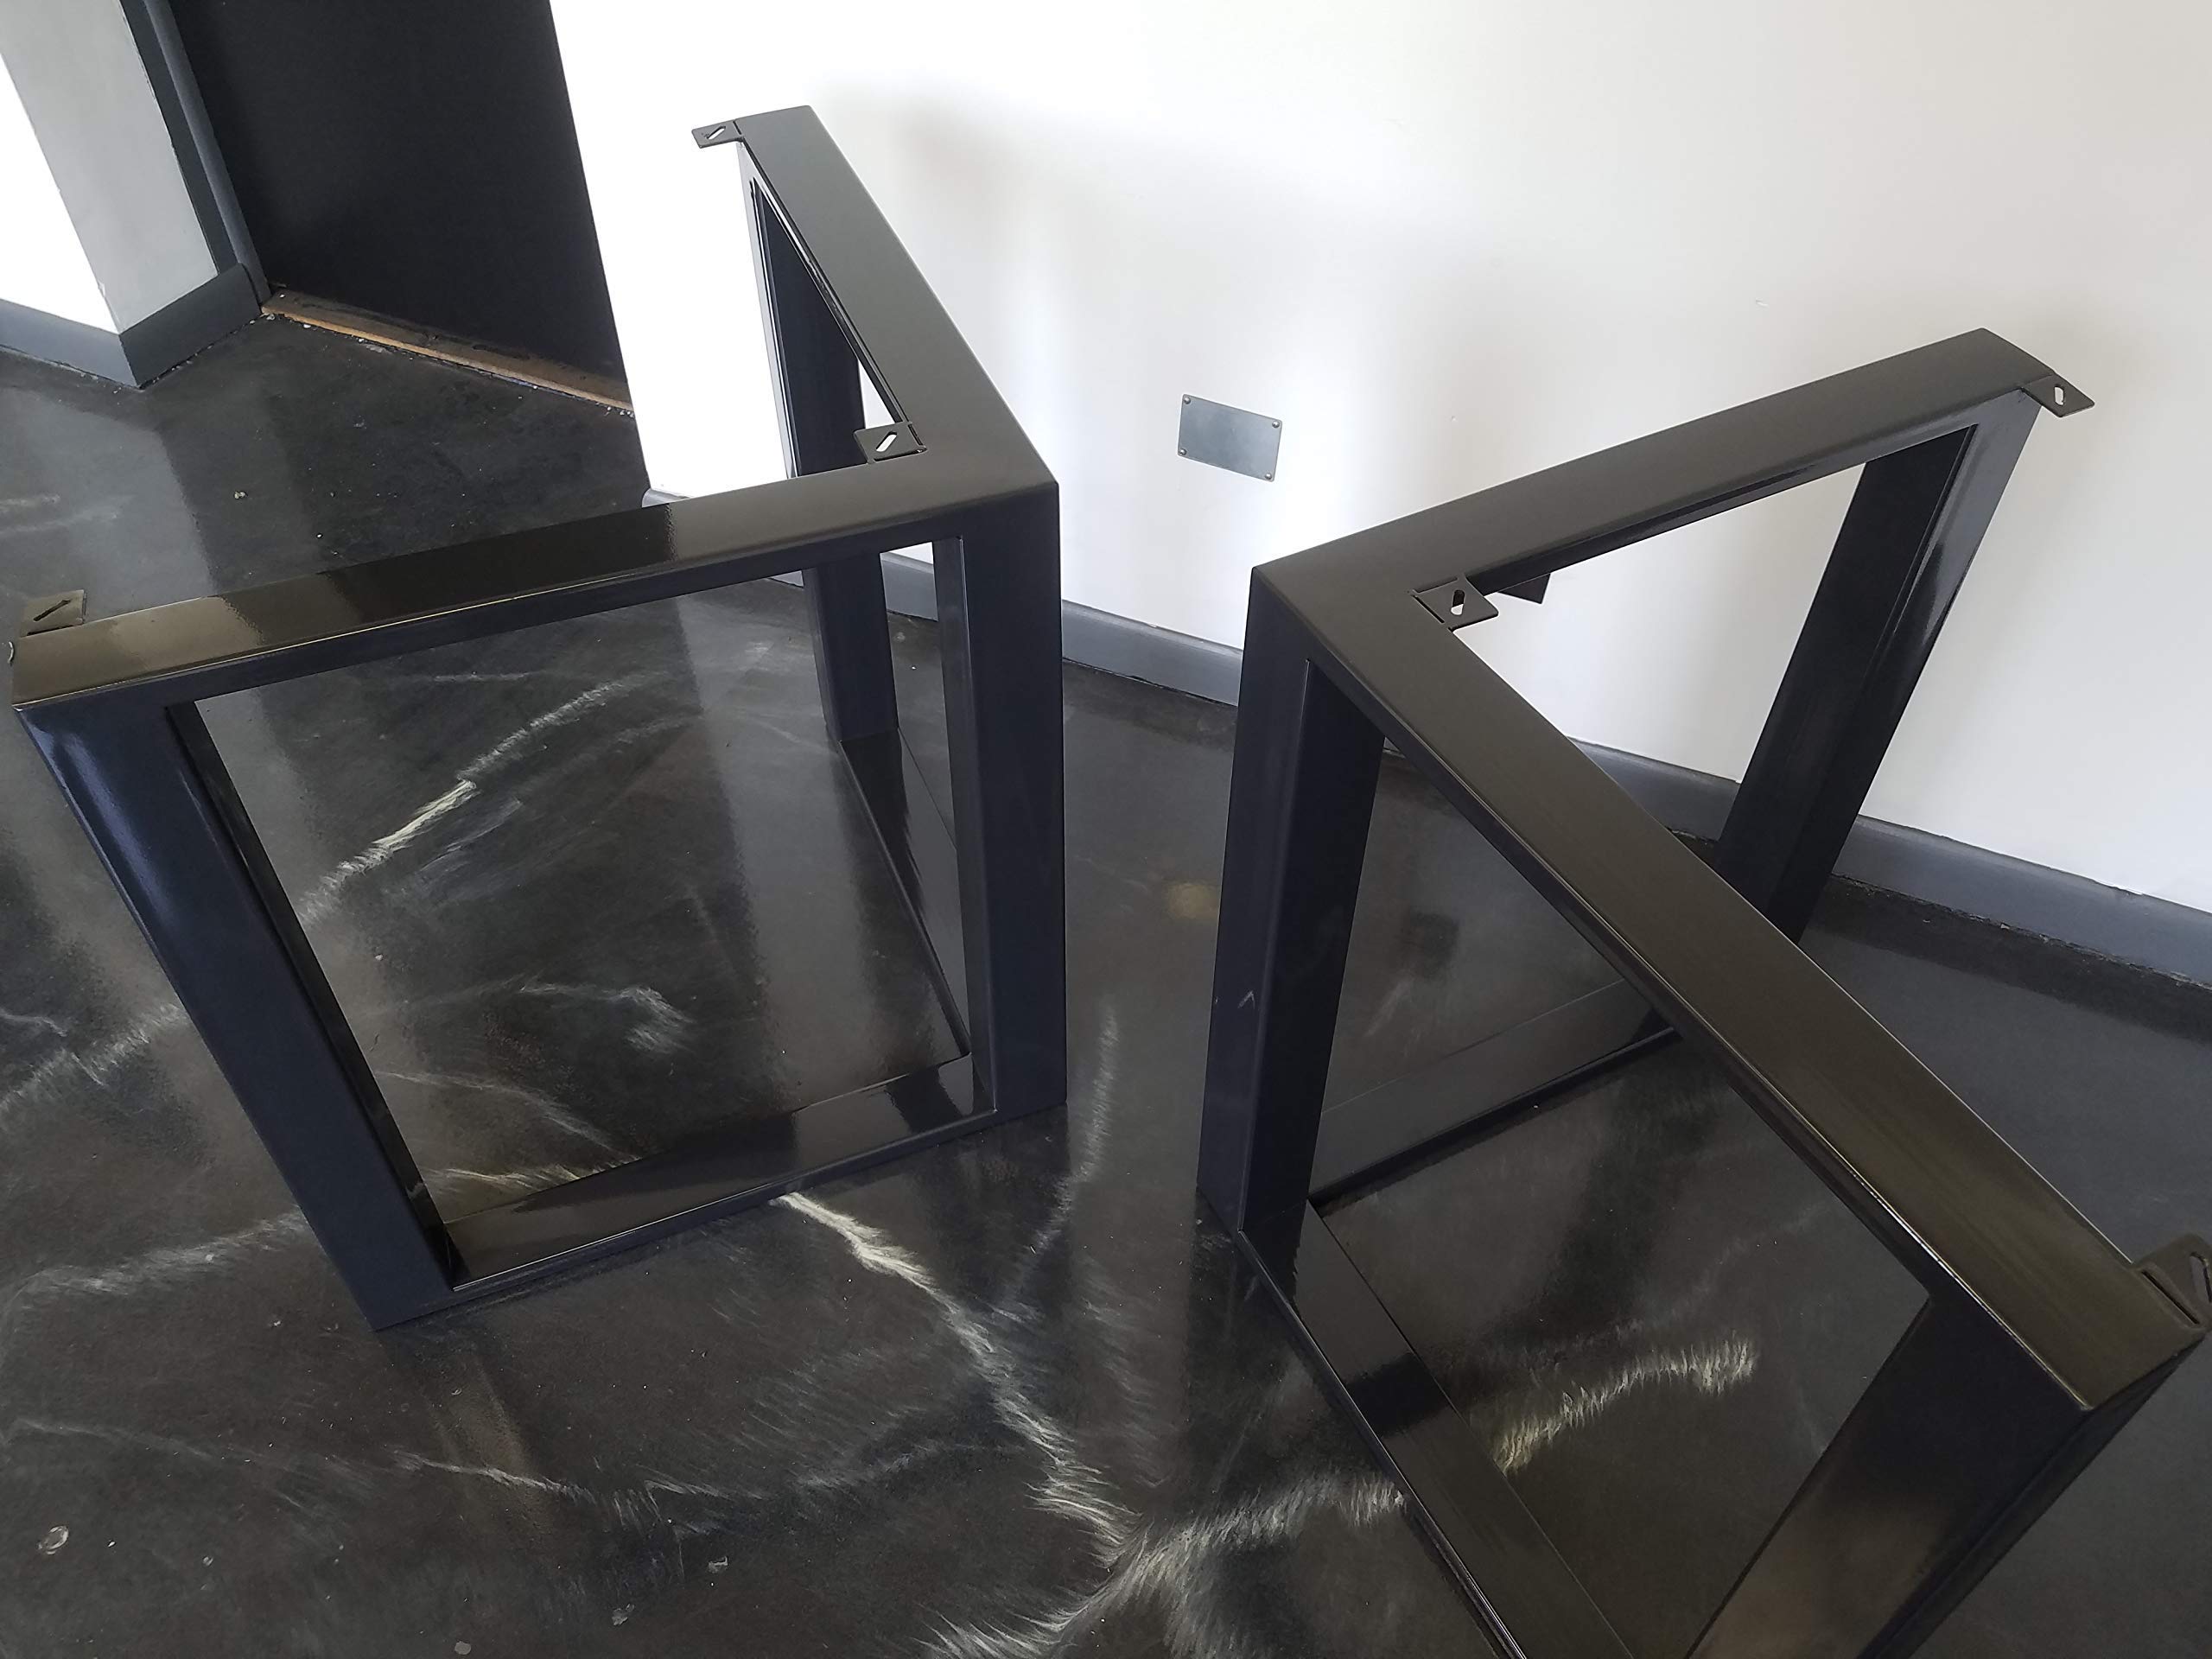 Metal Table Legs, HD Triangular Style - Any Size and Color